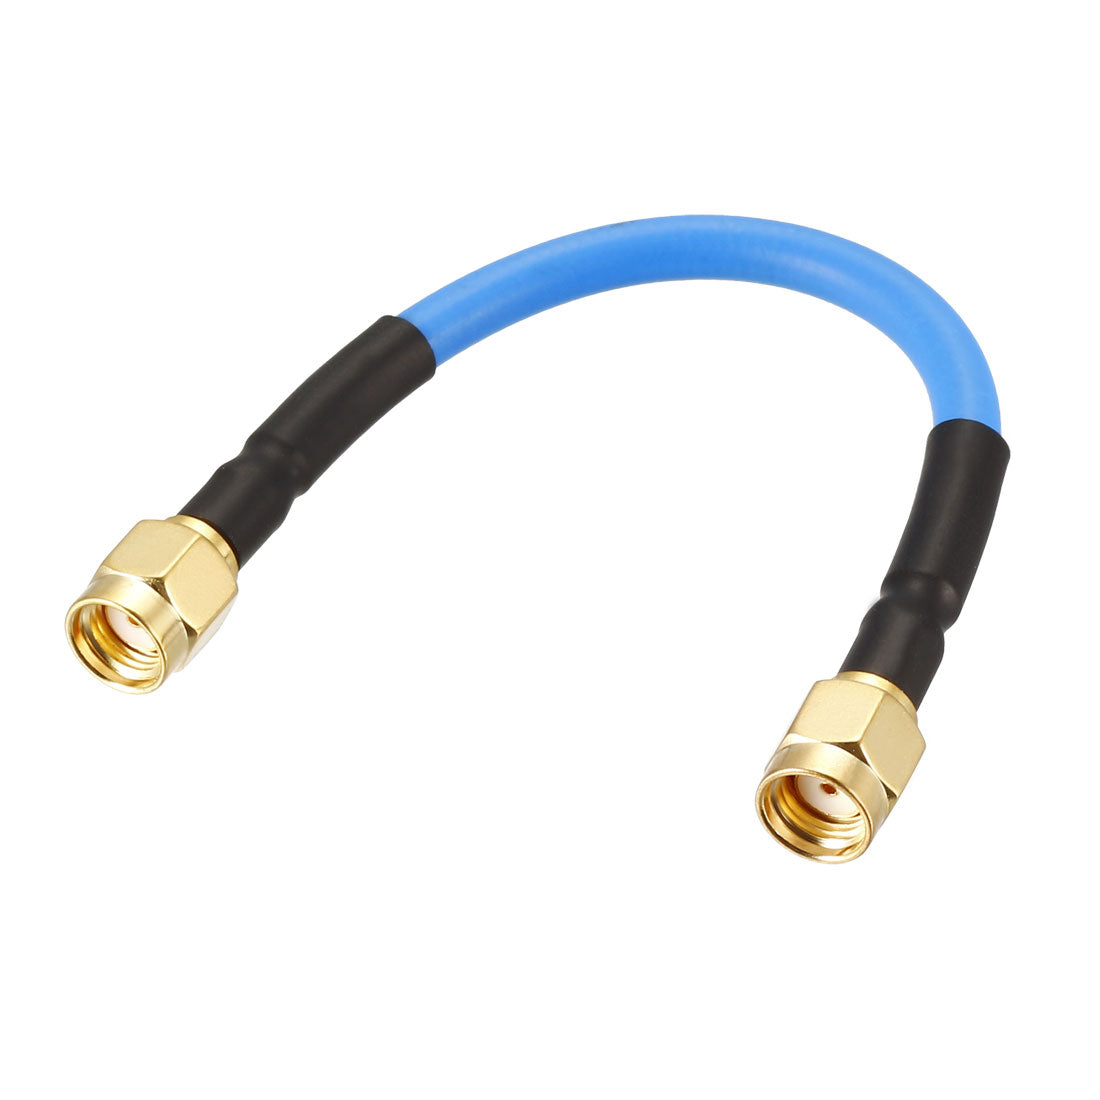 Uxcell Uxcell RP-SMA Male to RP-SMA Male RG402 RF Coaxial Coax Cable 0.15M/0.5Ft